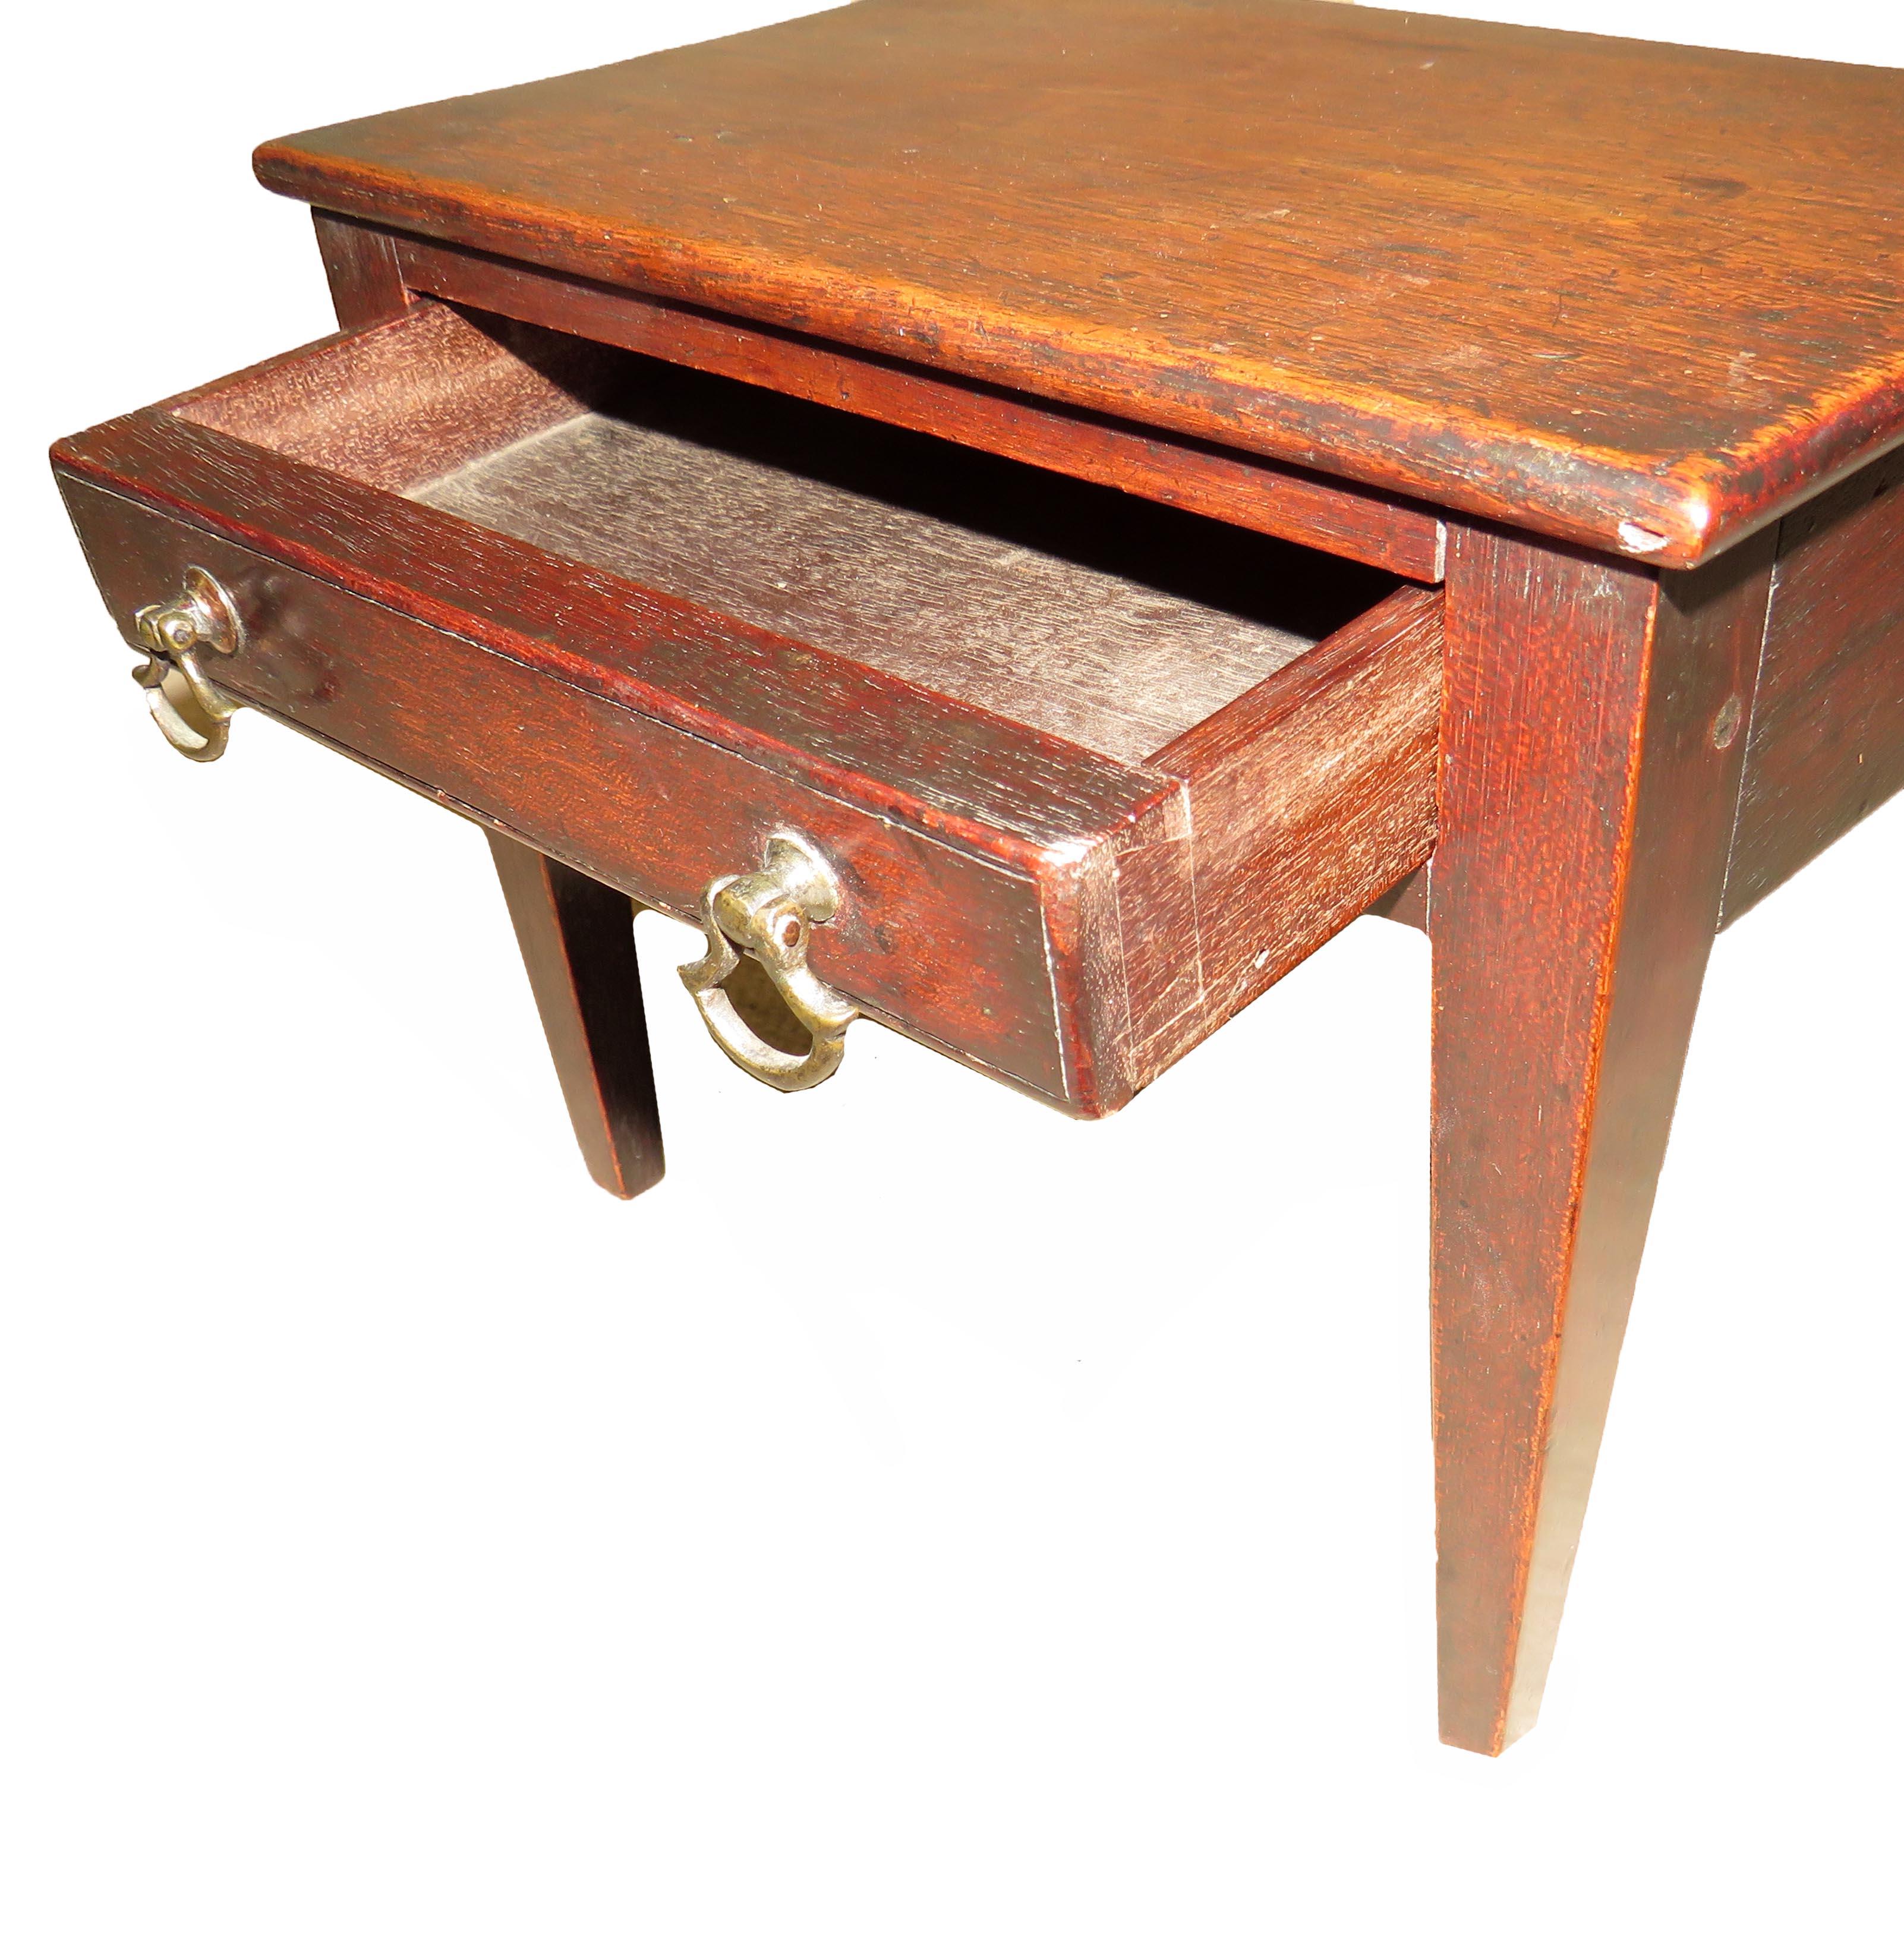 A charming late 18th century mahogany miniature side
Table having well figured top over one frieze drawer
With original brass handles raised on elegant square
Tapering legs

(There is often a debate over whether miniature furniture was made